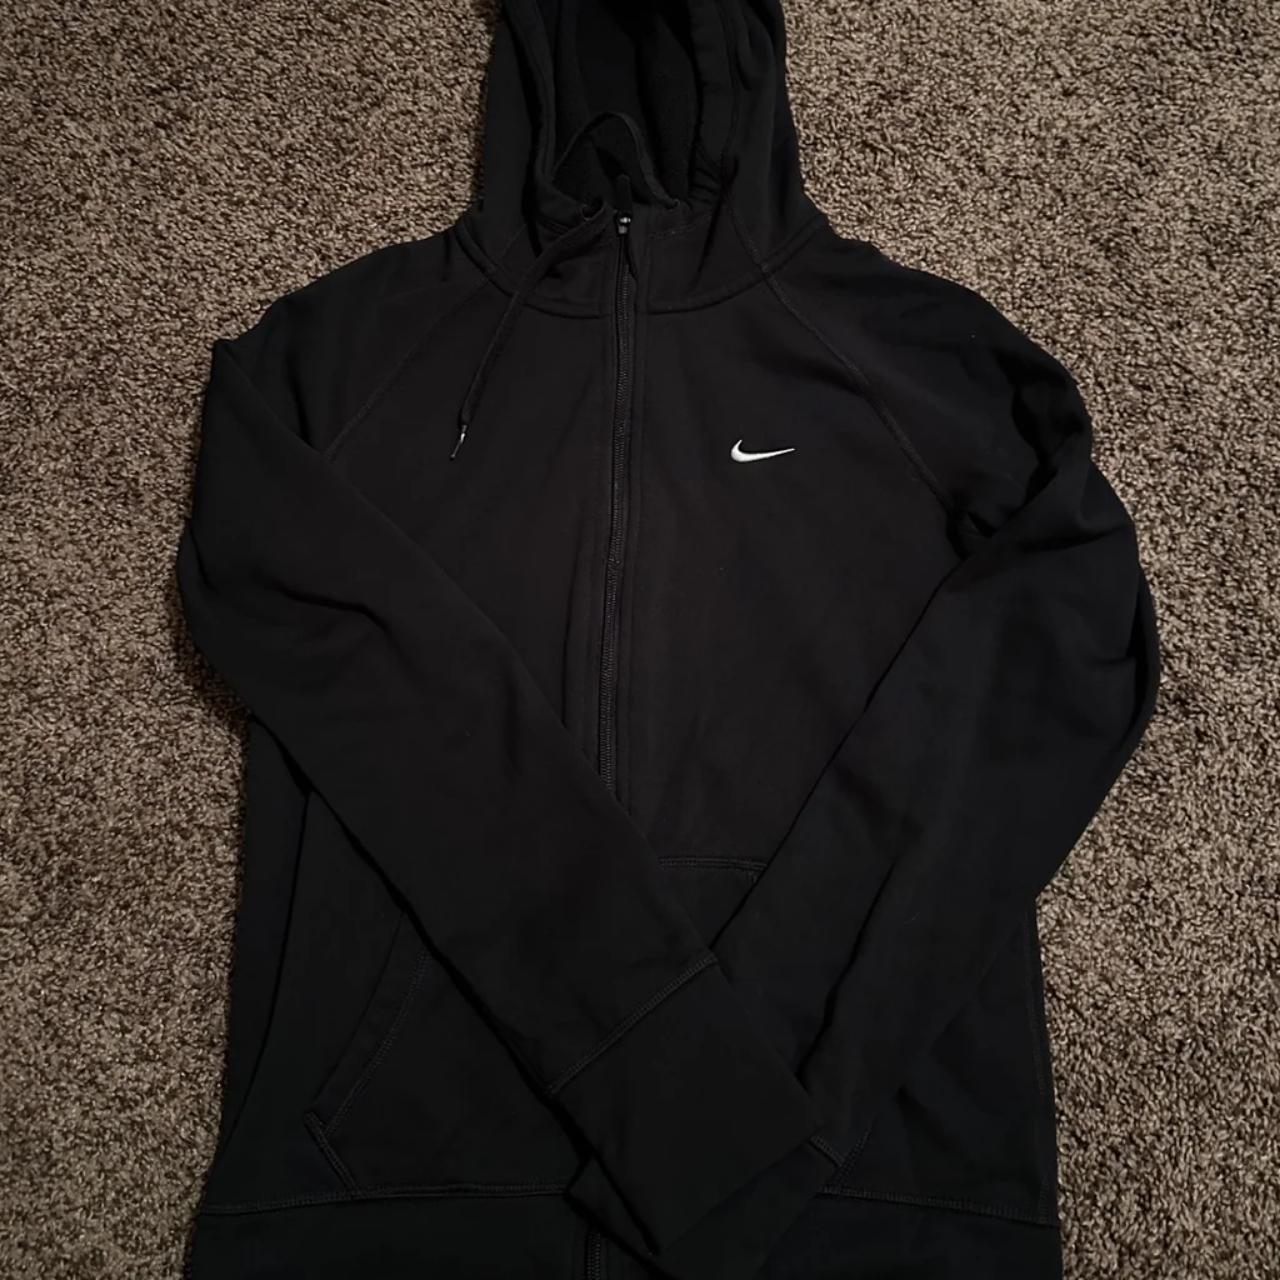 Nike therma fit Hooded jacket size small Please... - Depop